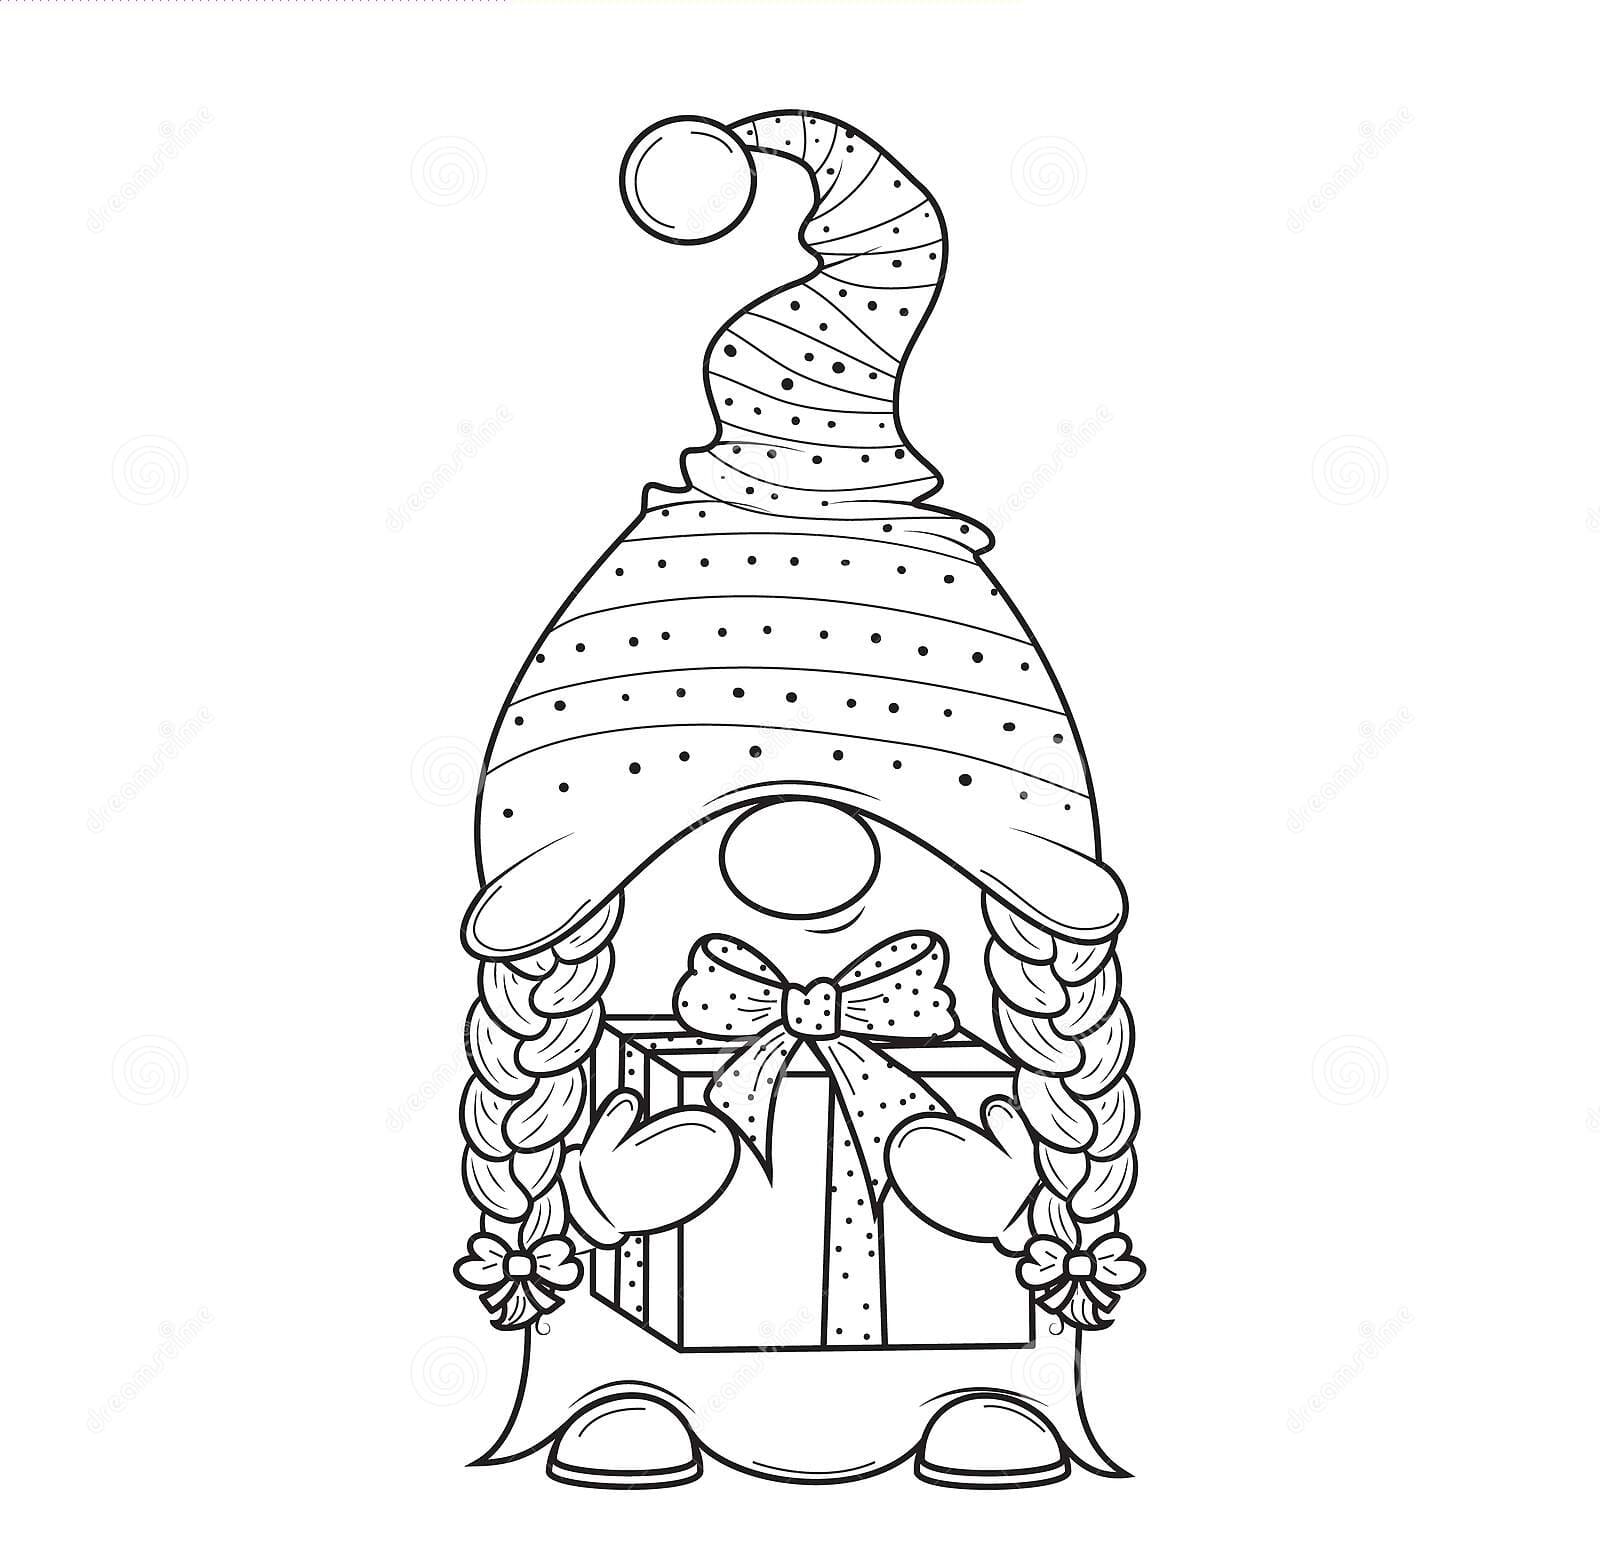 Cute Cartoon Christmas Coloring Page